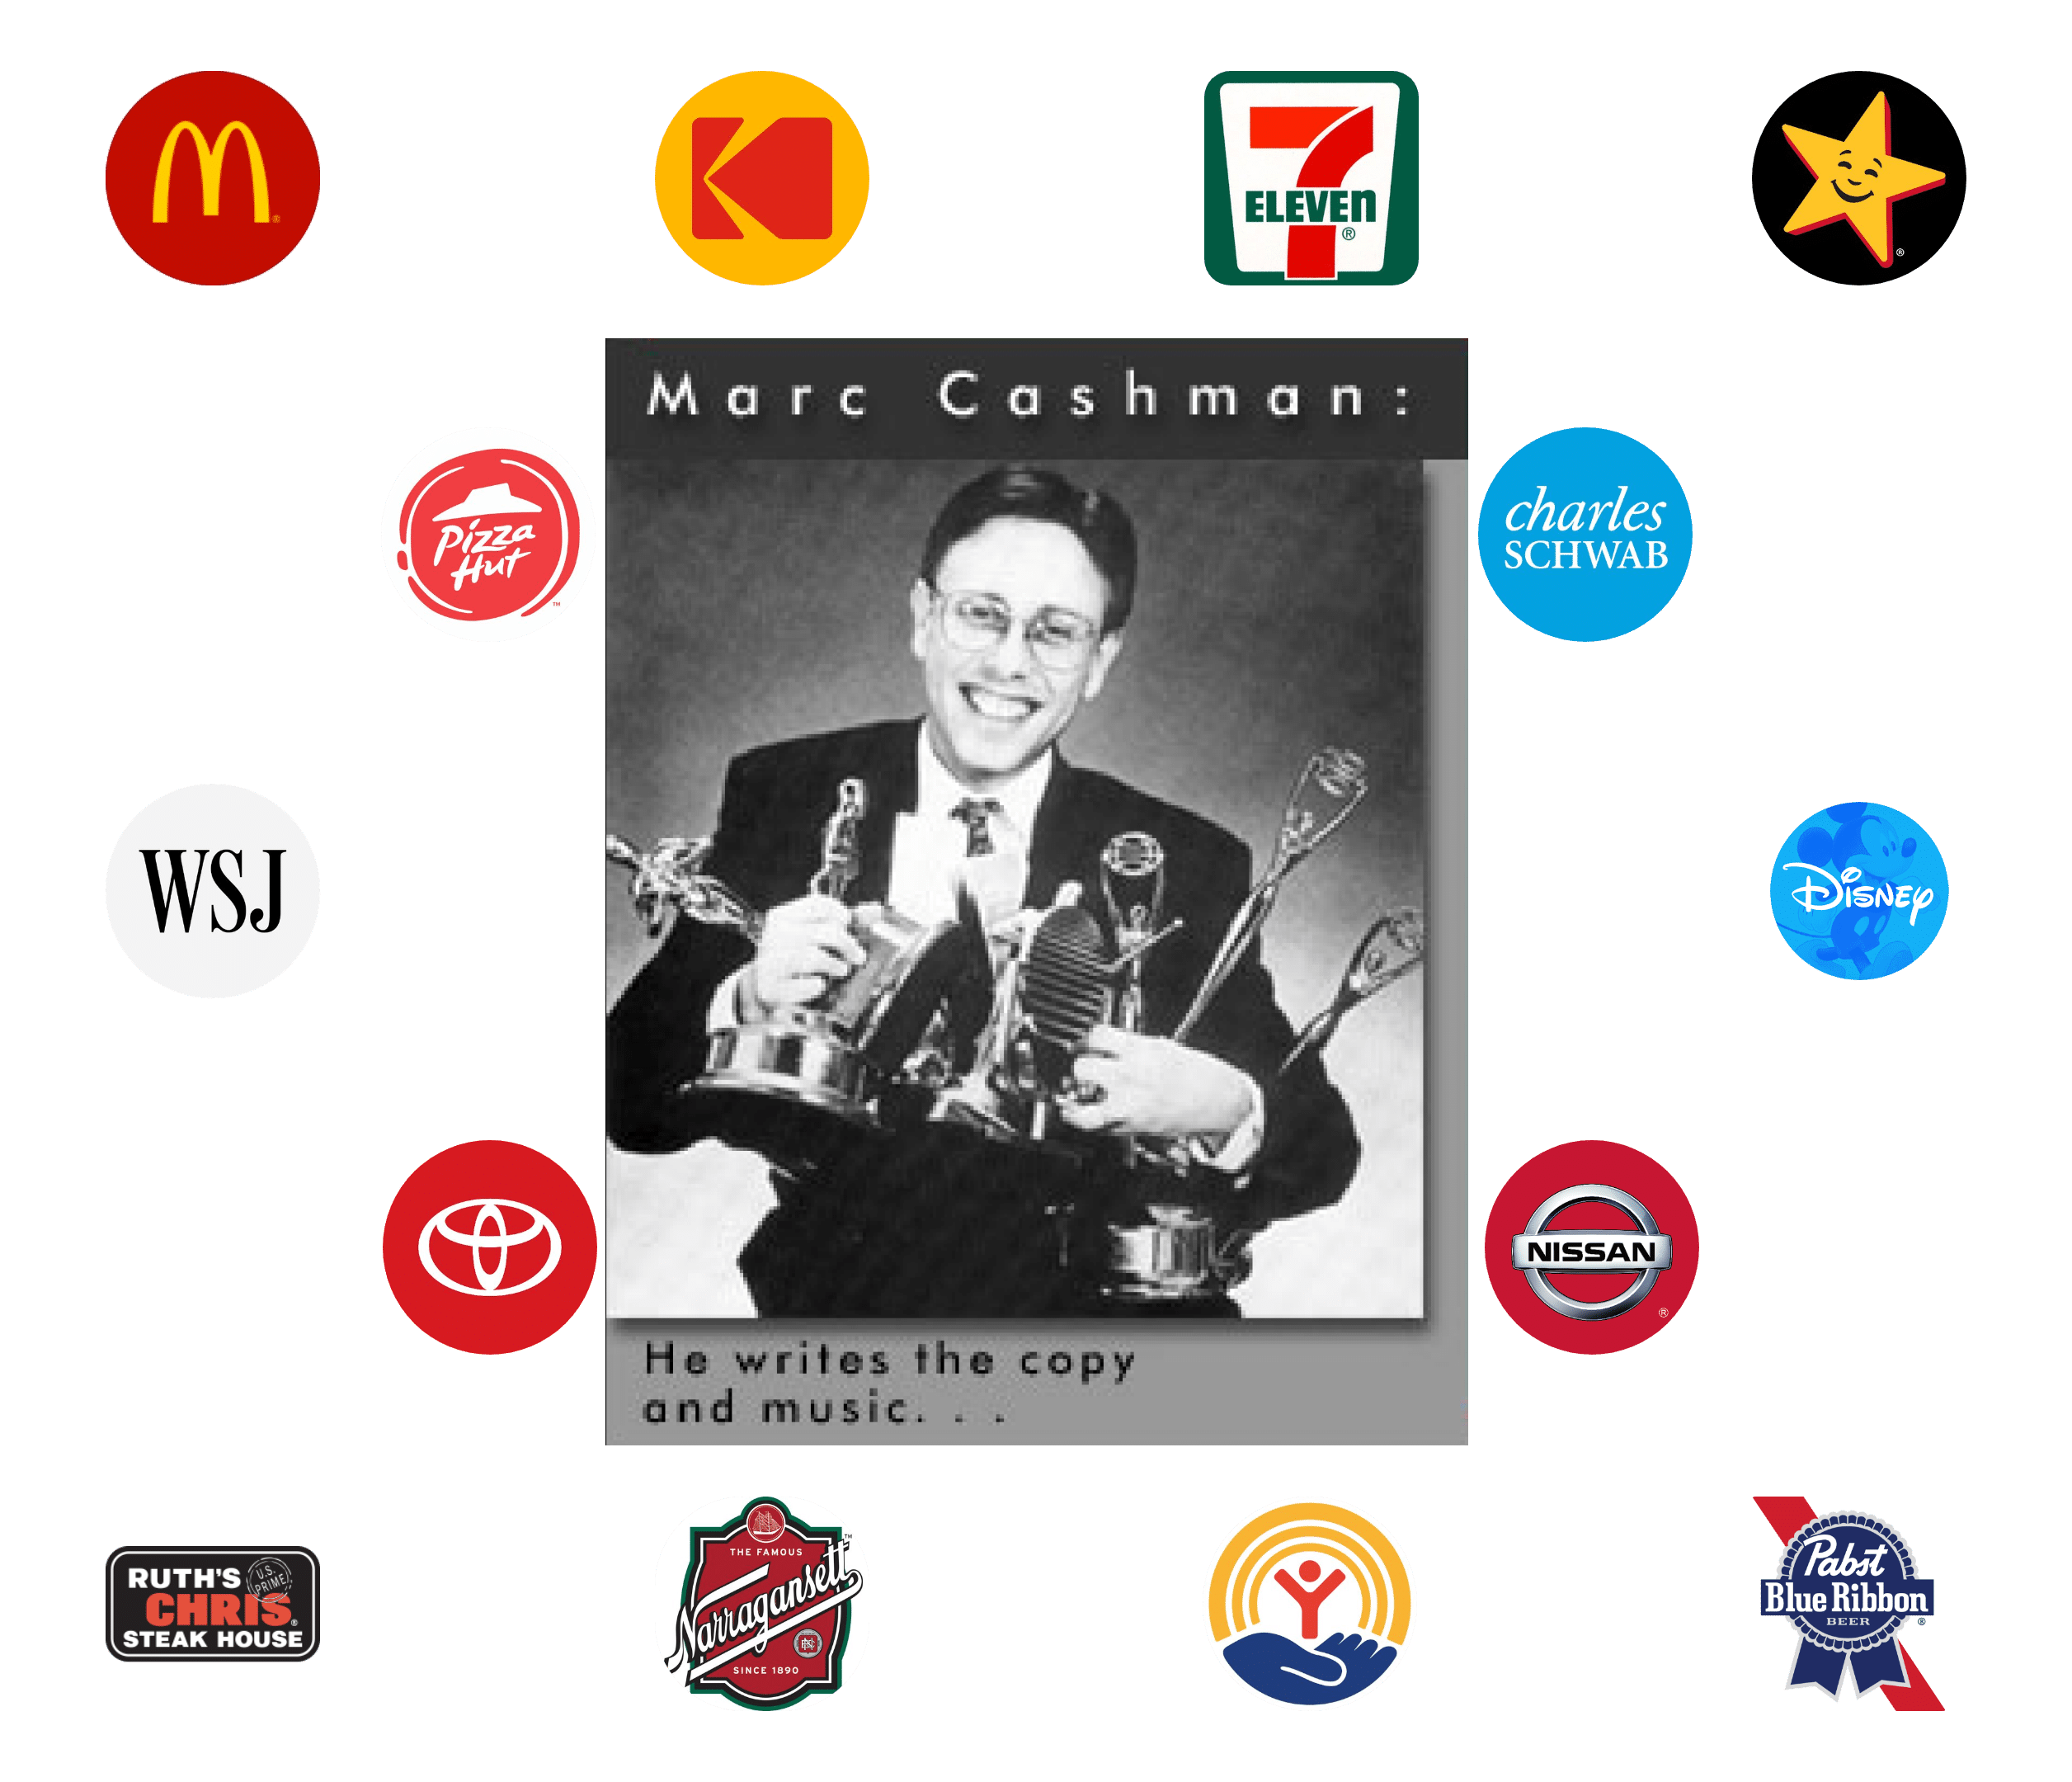 Retro picture of Marc Cashman holding advertising and voiceover awards over high-profile client logos like Disney, McDonalds, and Toyota.